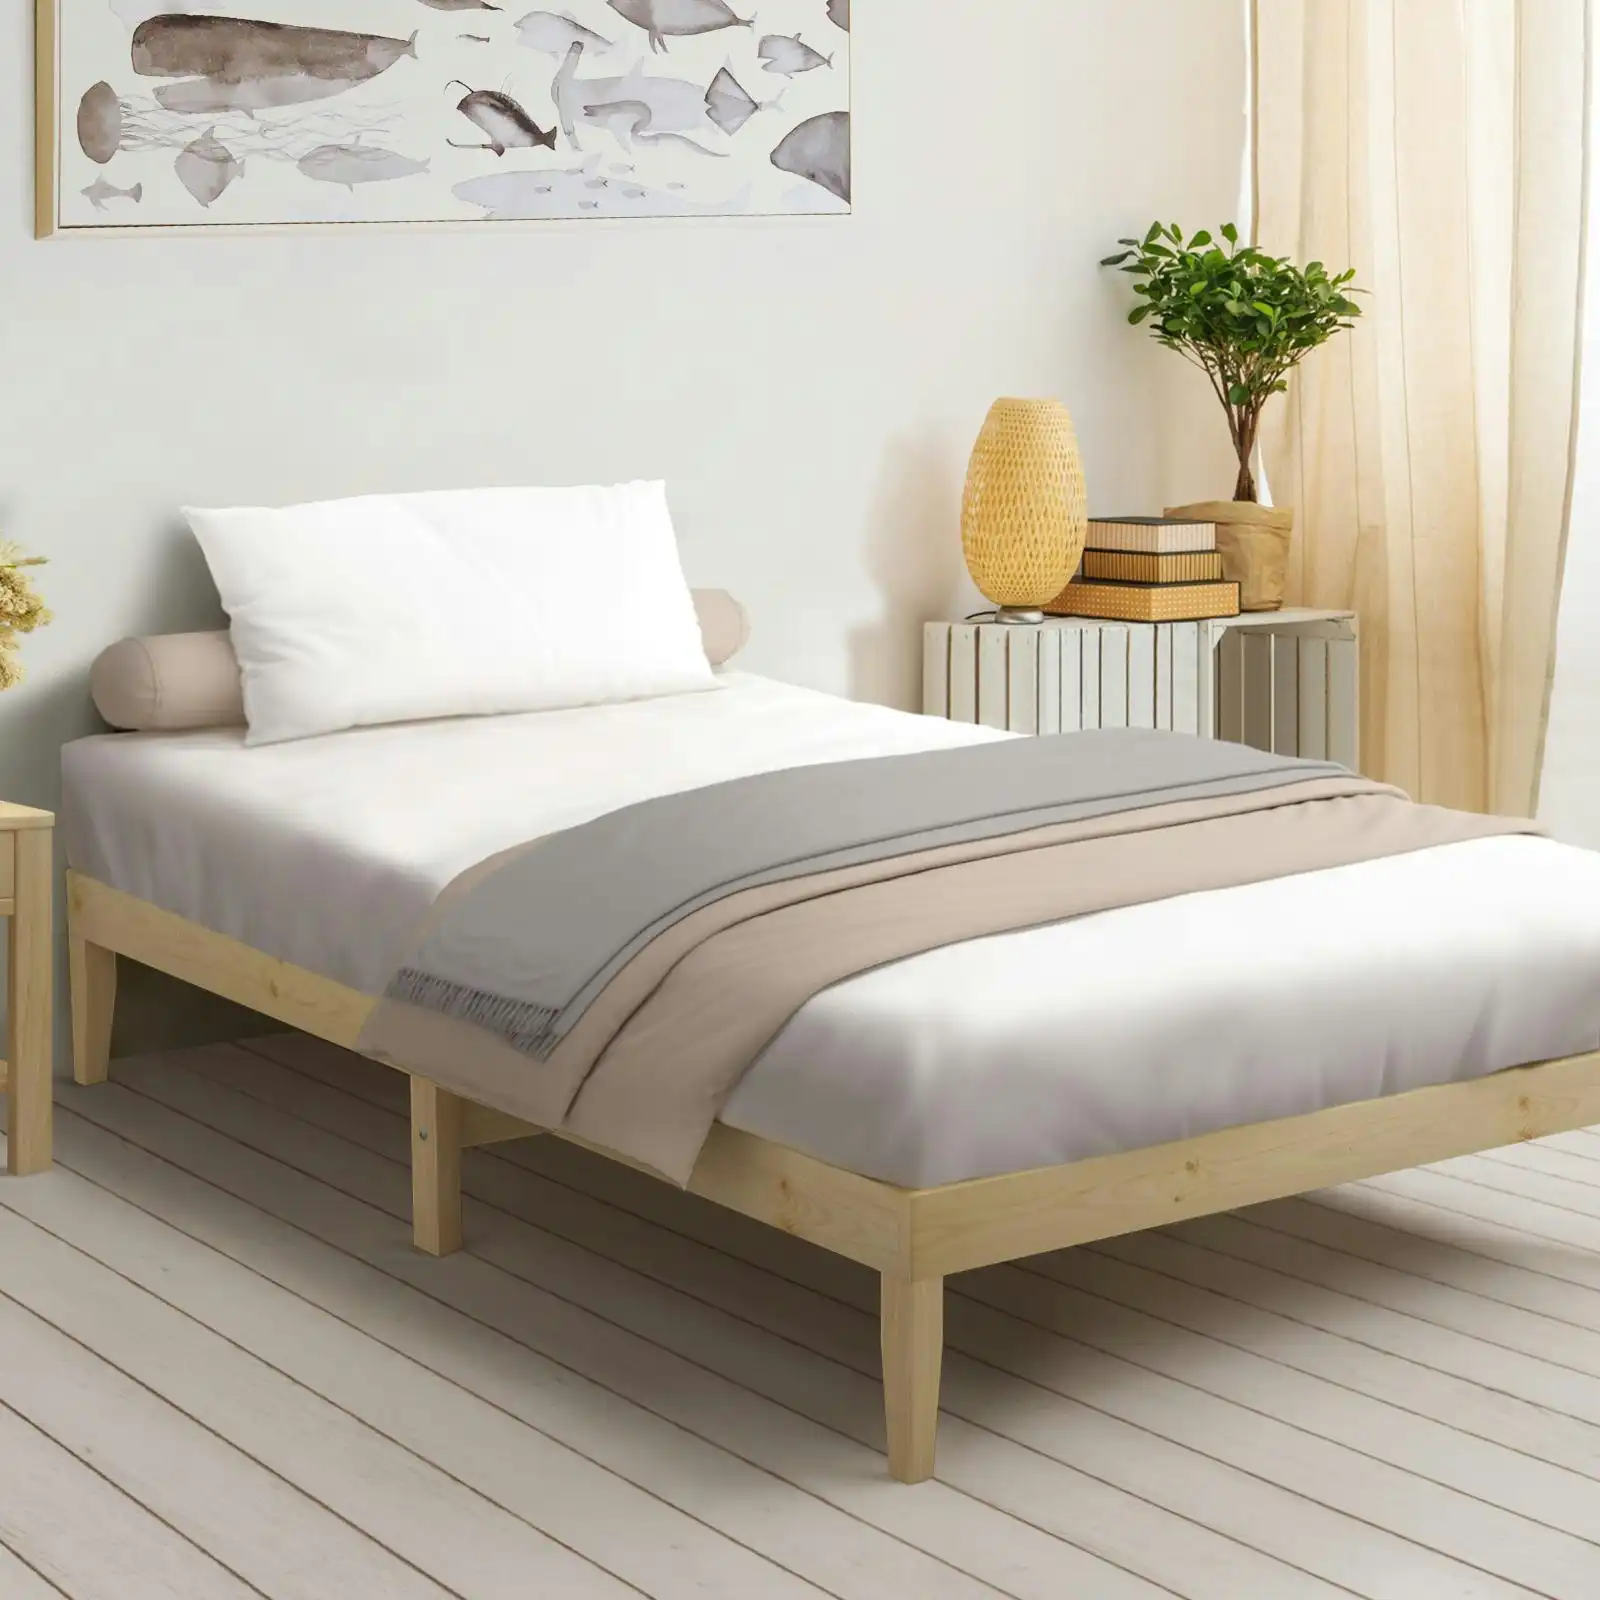 Oikiture Bed Frame King Single Size Wooden Bed Base A8